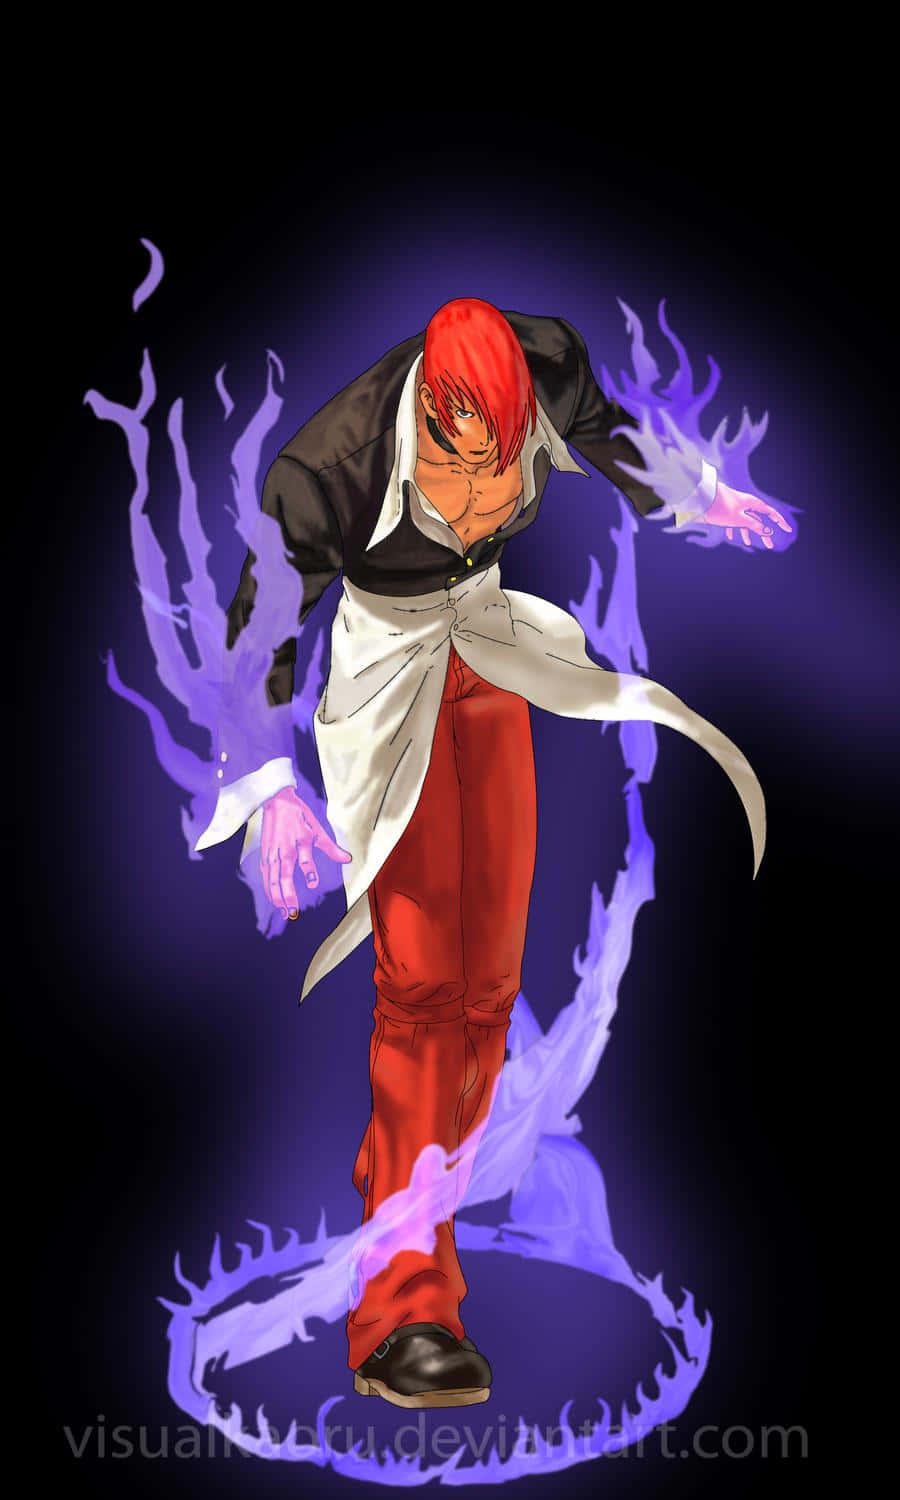 Iori Yagami from SNK's The King of Fighters Wallpaper